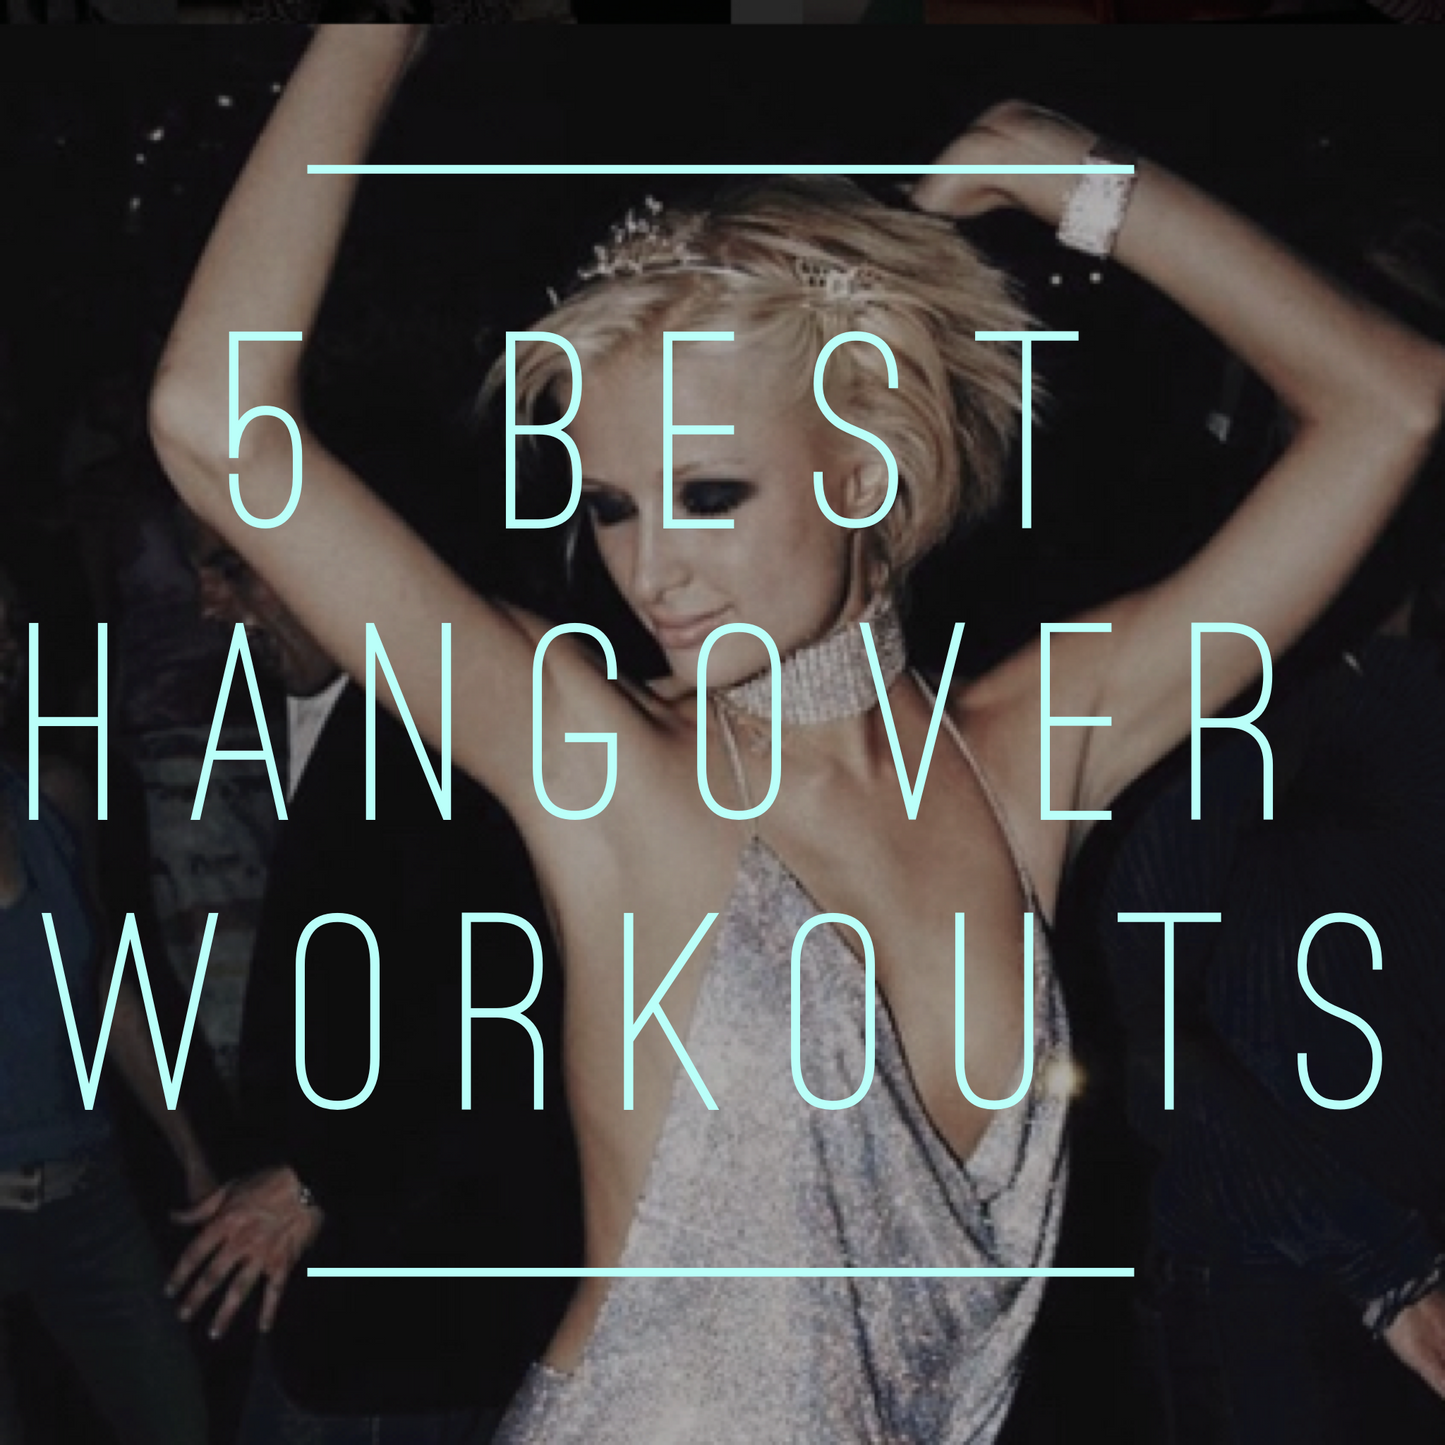 5 Best Hangover Workouts